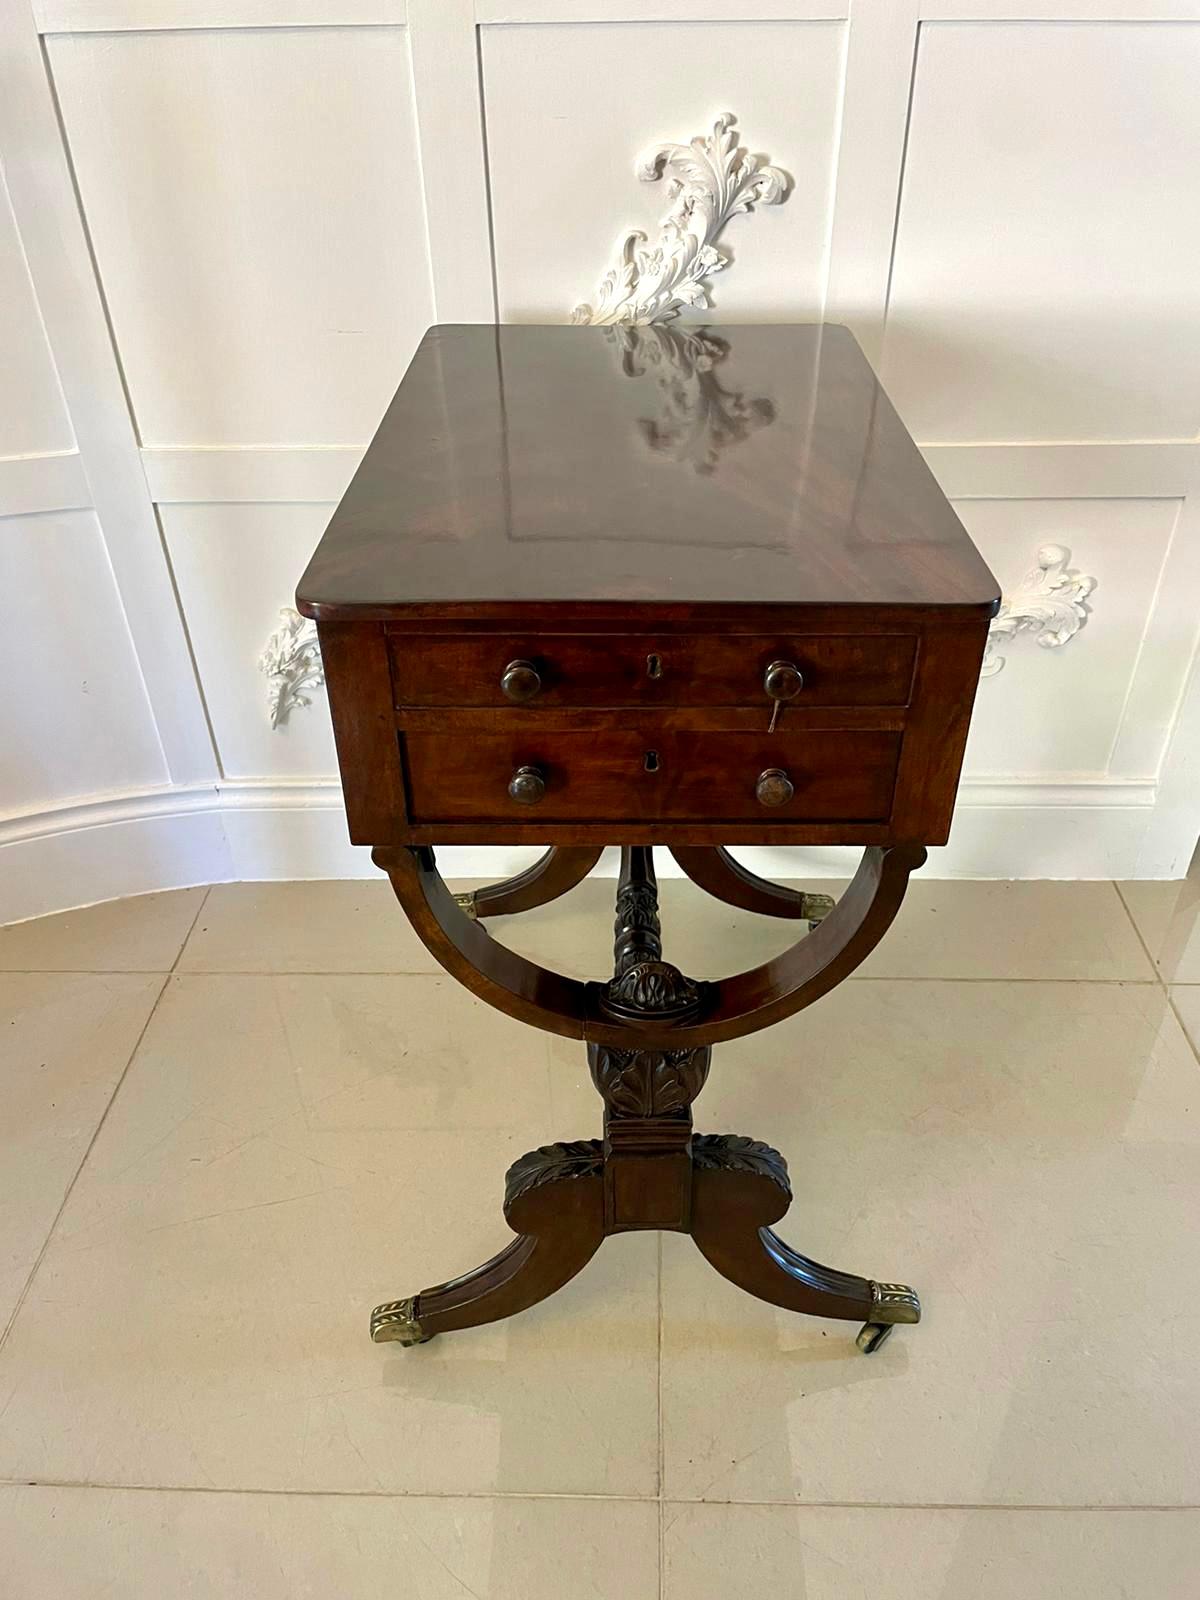 Unusual Outstanding Quality Antique Freestanding Figured Mahogany Centre Table In Good Condition For Sale In Suffolk, GB